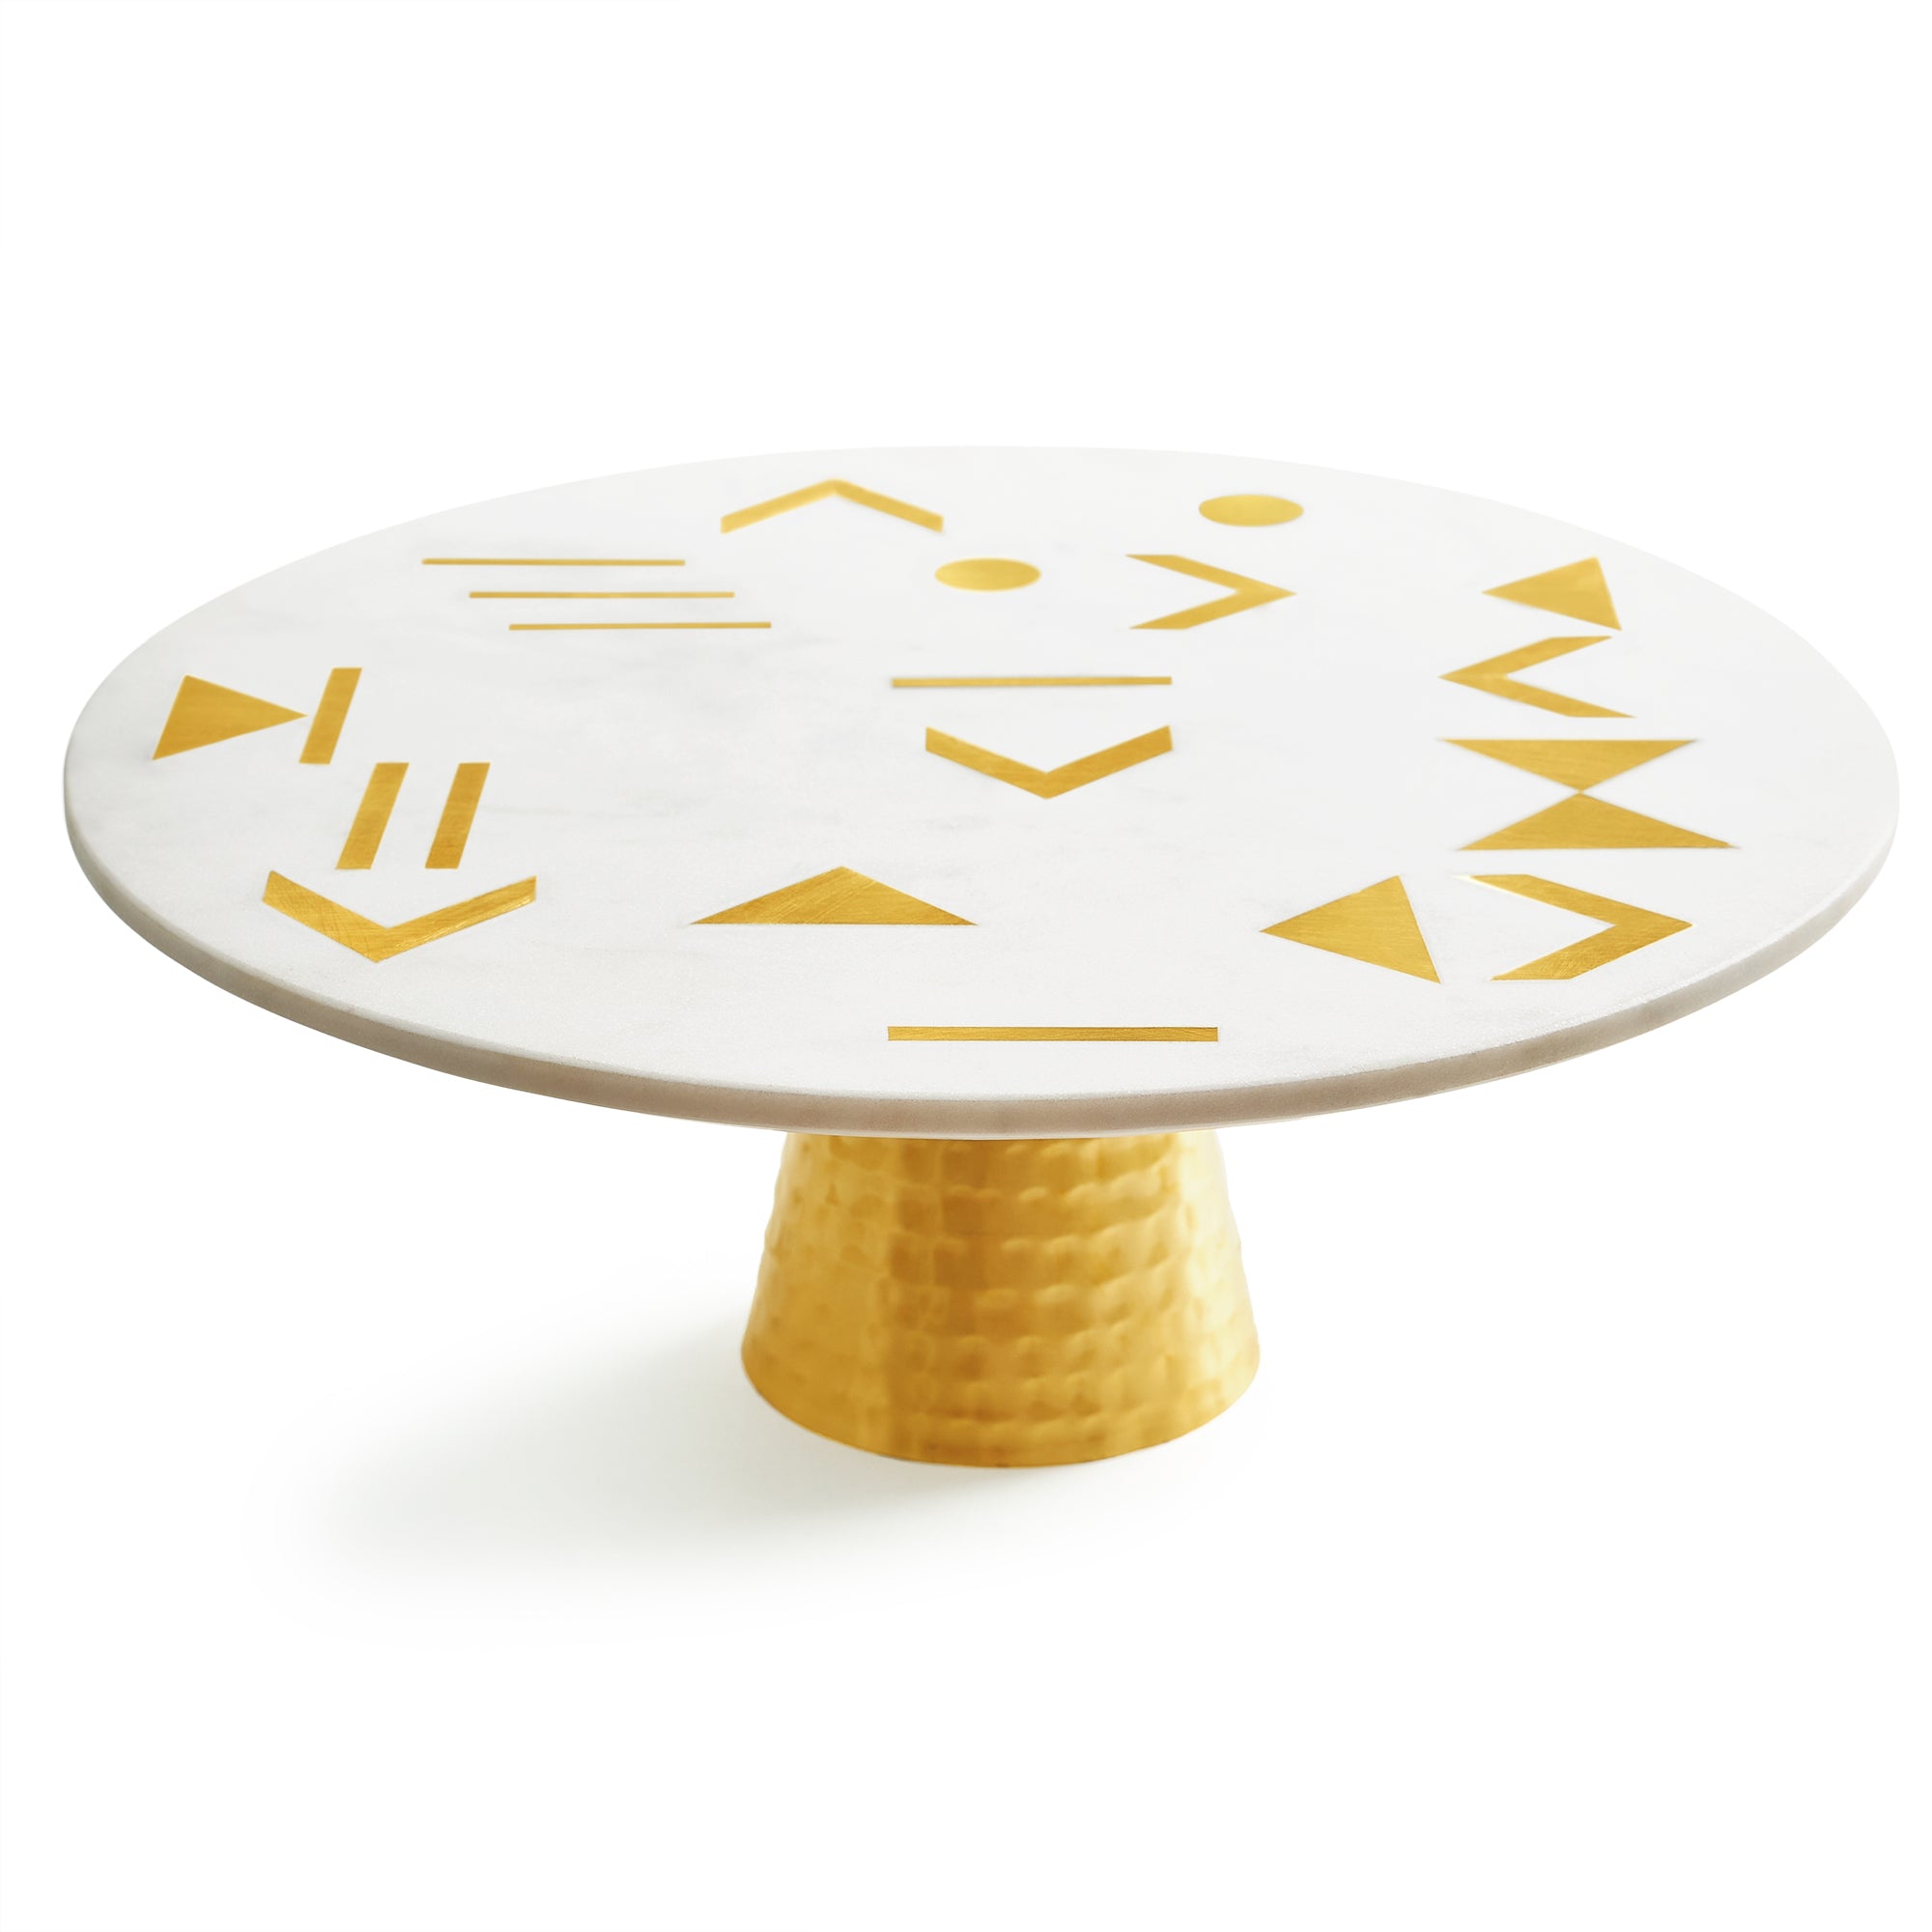 Cupcake Stand or Cake Stands